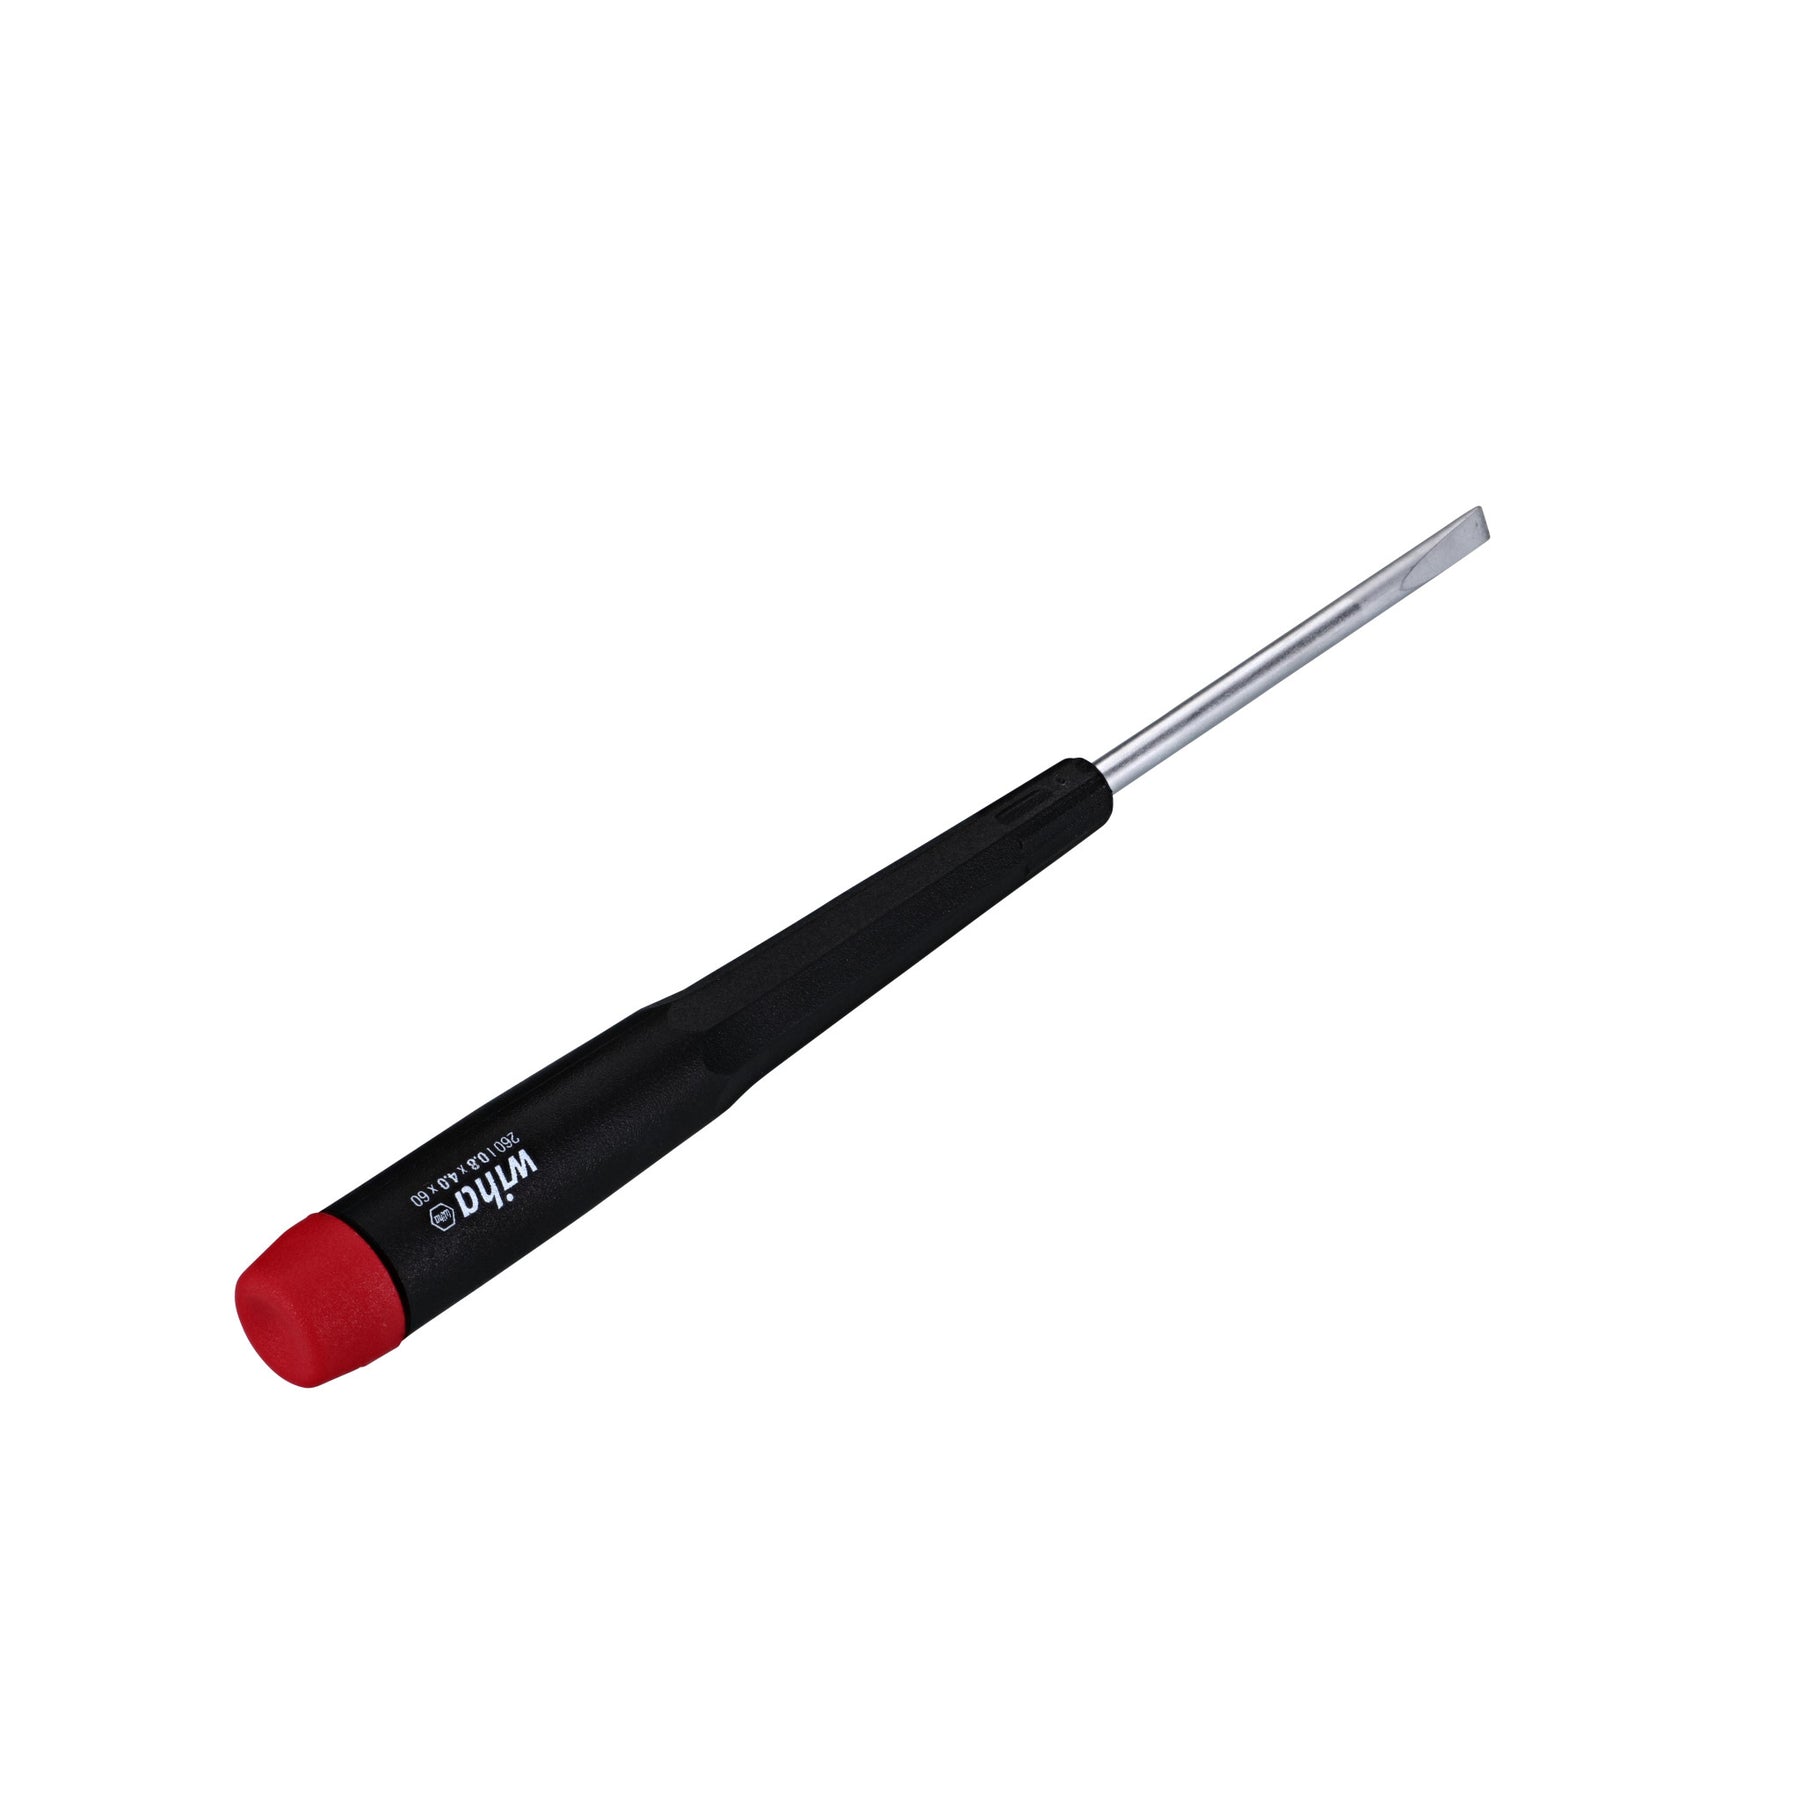 Precision Slotted Screwdriver 4.0mm x 60mm